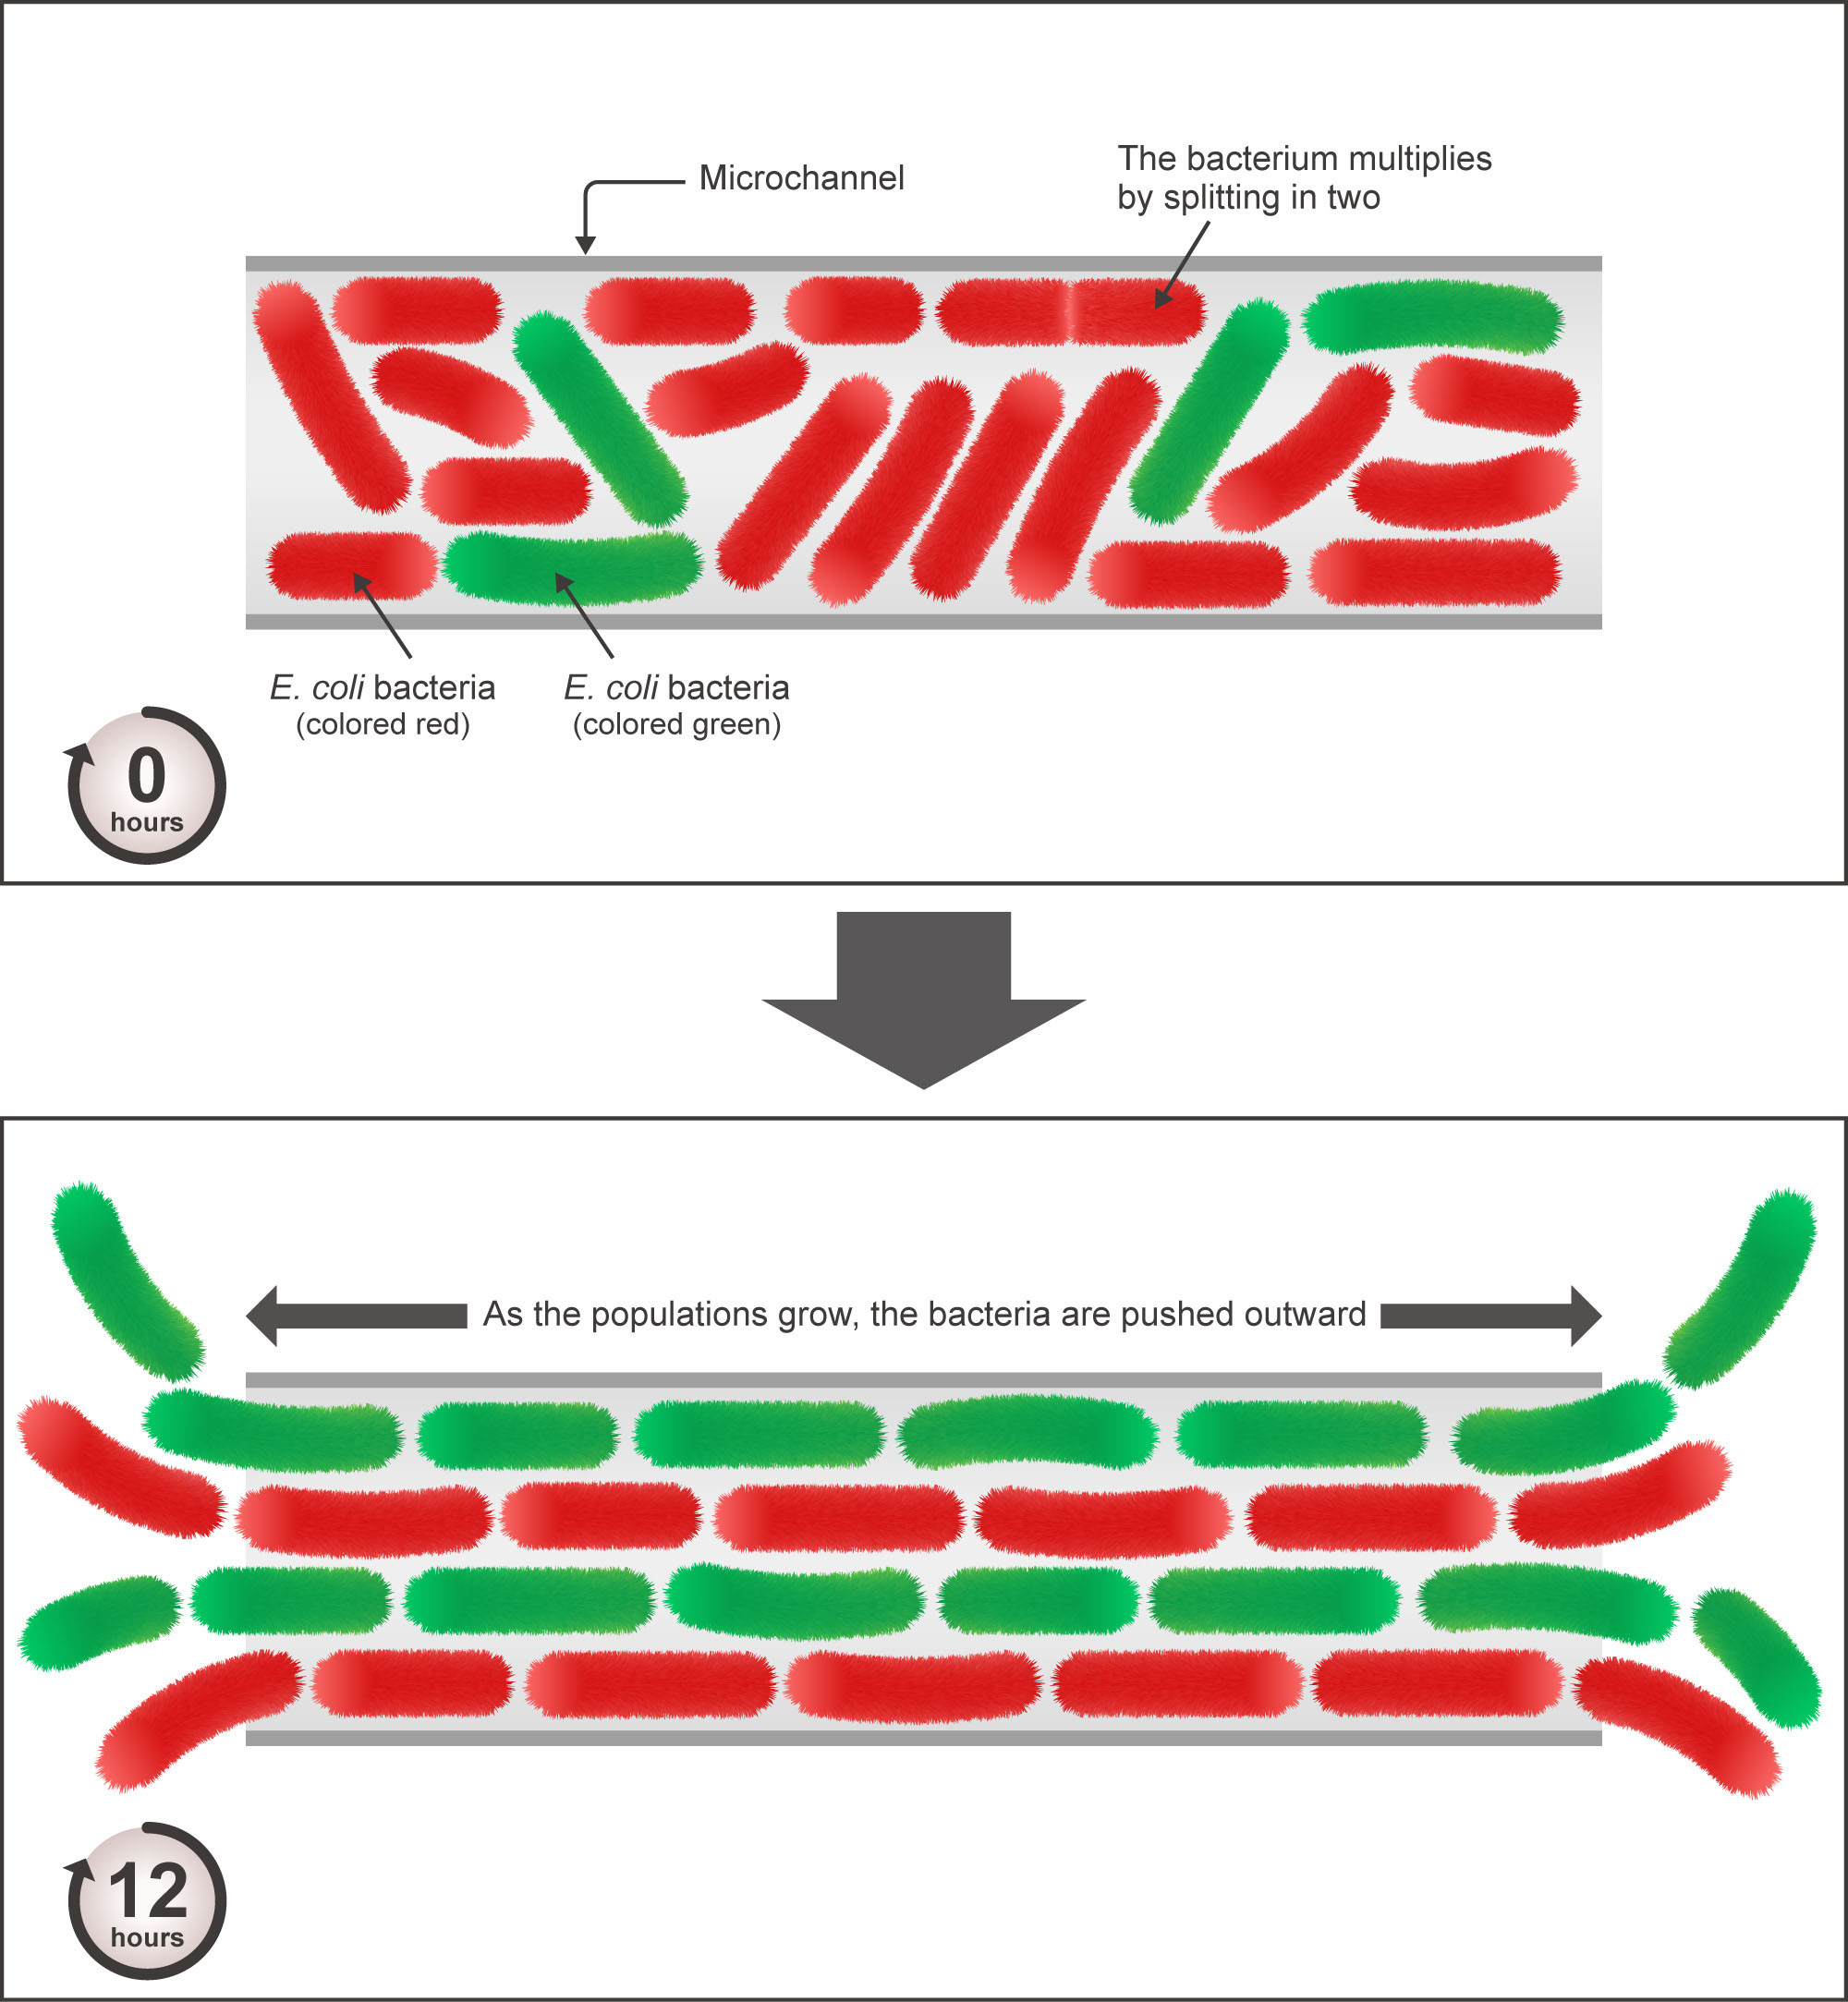 Researchers found that when constrained in small places, the rod-shaped E. coli forms distinctive lane-like patterns.